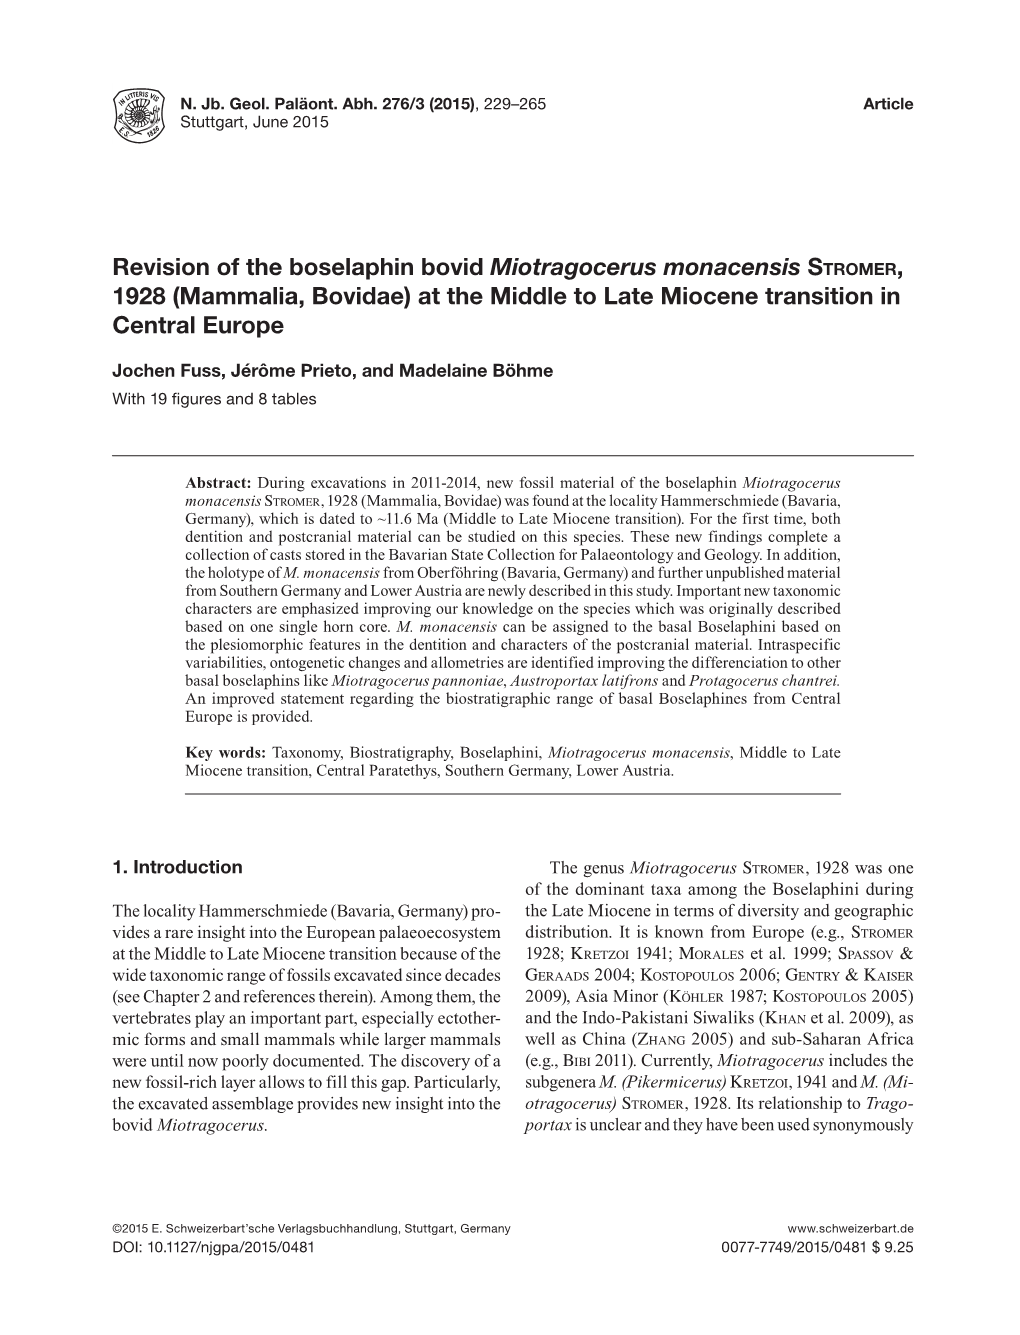 Revision of the Boselaphin Bovid Miotragocerus Monacensis Stromer, 1928 (Mammalia, Bovidae) at the Middle to Late Miocene Transition in Central Europe